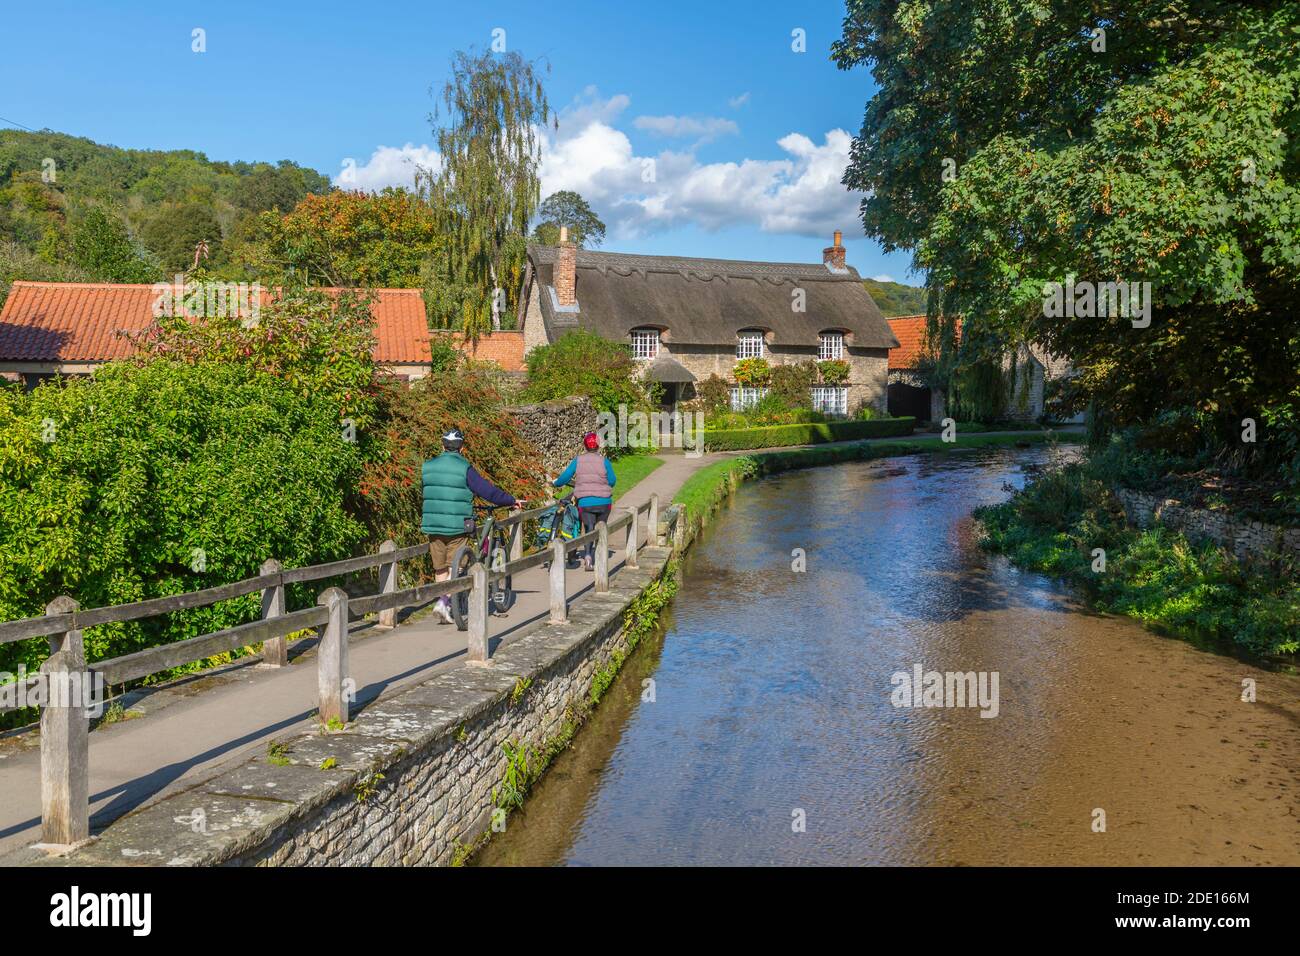 View of cyclists, riverside thatched cottage and Thornton Beck, Thornton Dale, North Yorkshire, England, United Kingdom, Europe Stock Photo